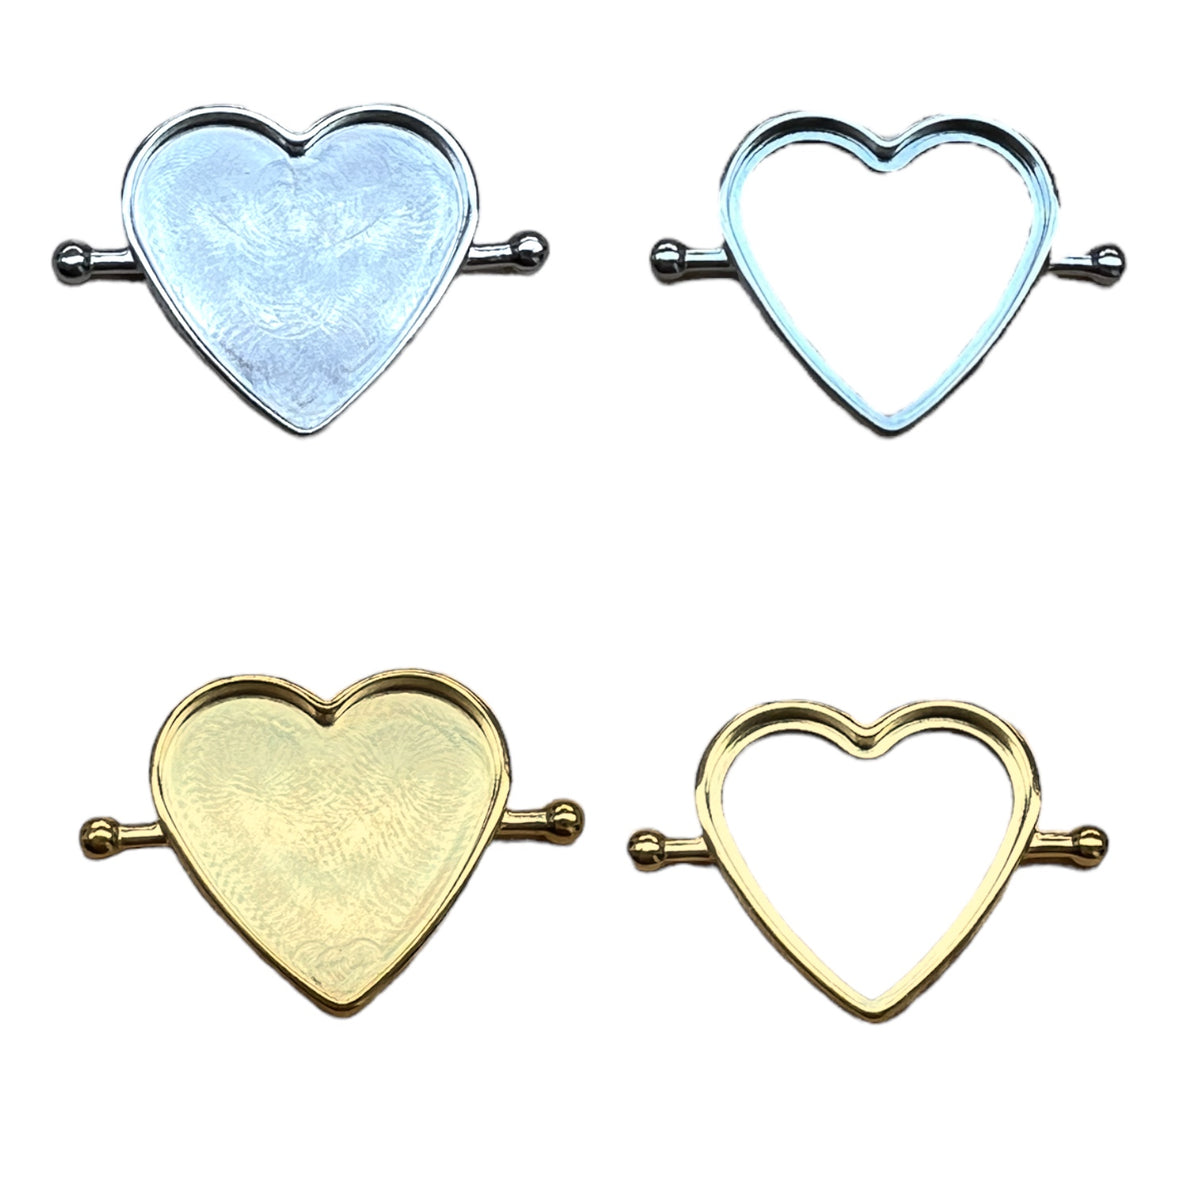 CONQUERing Heart Shaped Blank Element for DIY Silver or Gold Jewelry